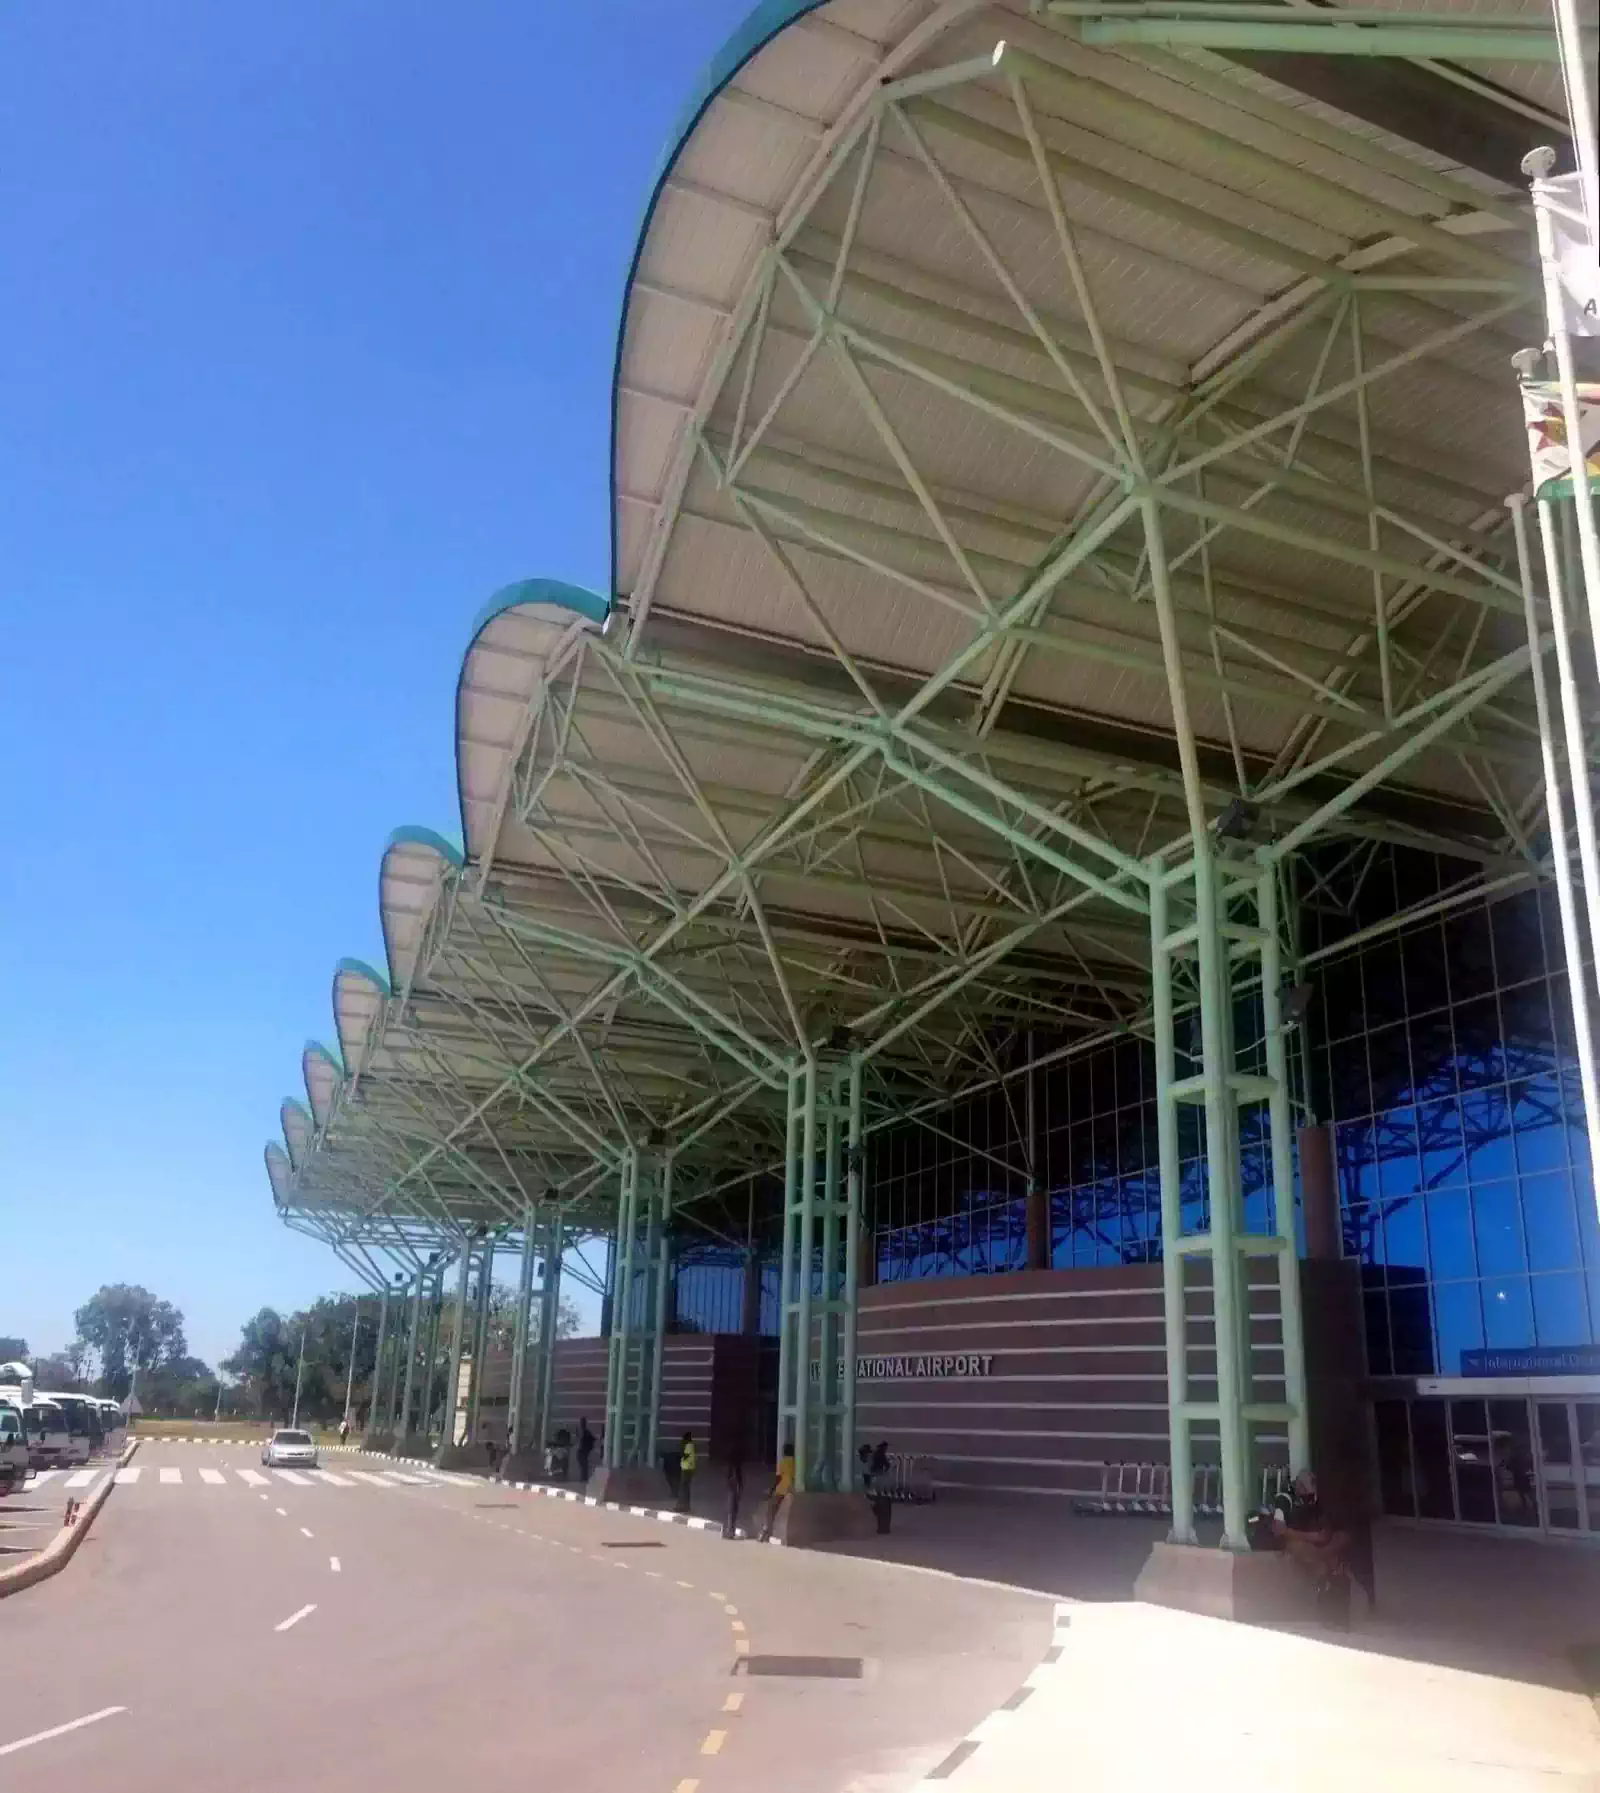 Elaborate steel structure carrying entrance canopy to VicFalls aiport